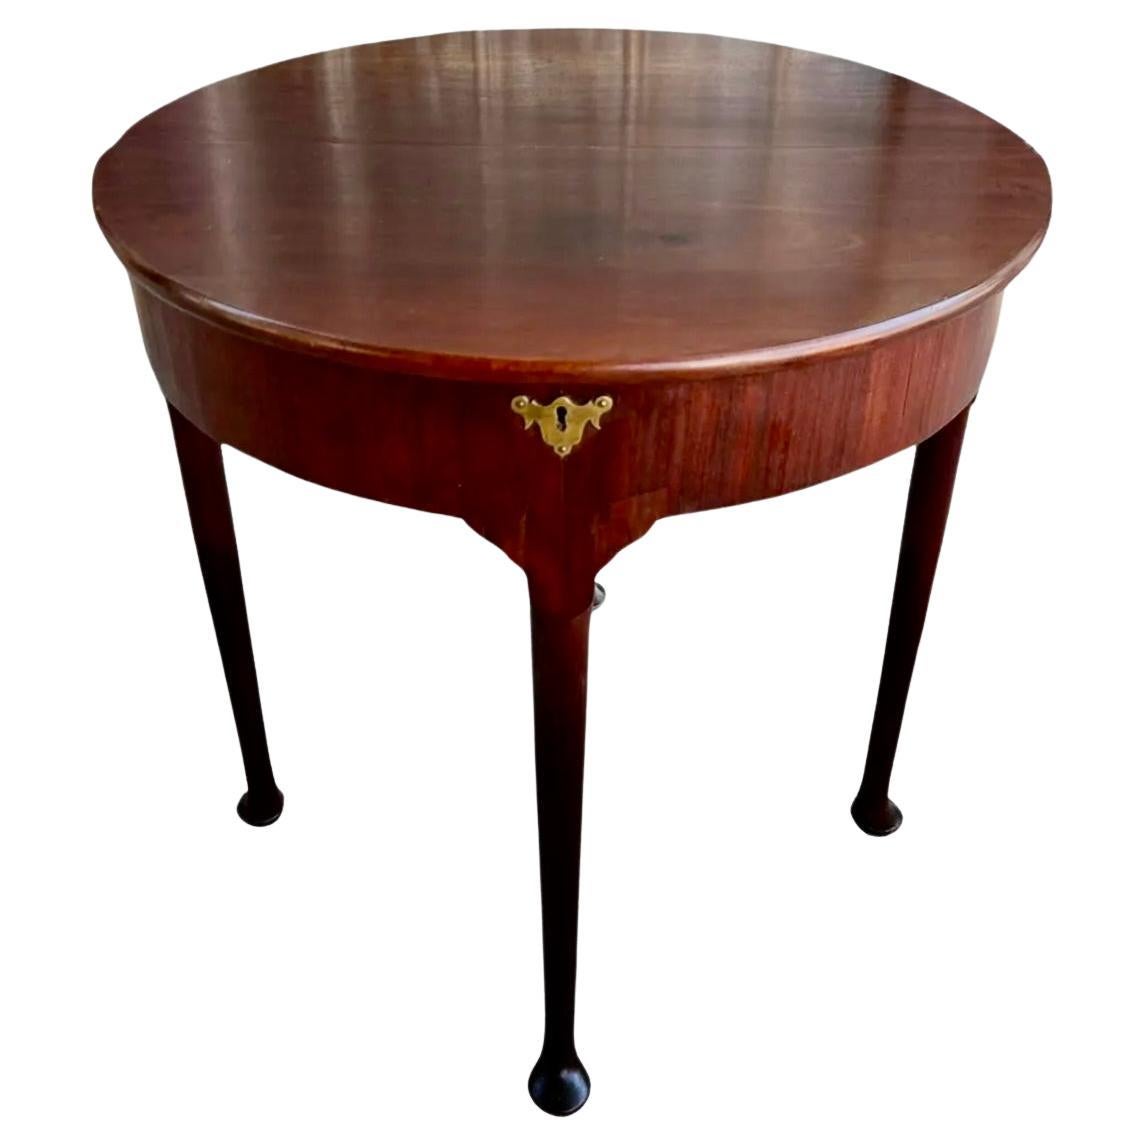 18th Century Queen Anne Mahogany demi lune flip top side table. Half round top opens to expose a circular top. Fitted with exposed brass hinges on each side and hidden hinges underneath. The top is also meant to open up for storage (there is no key).